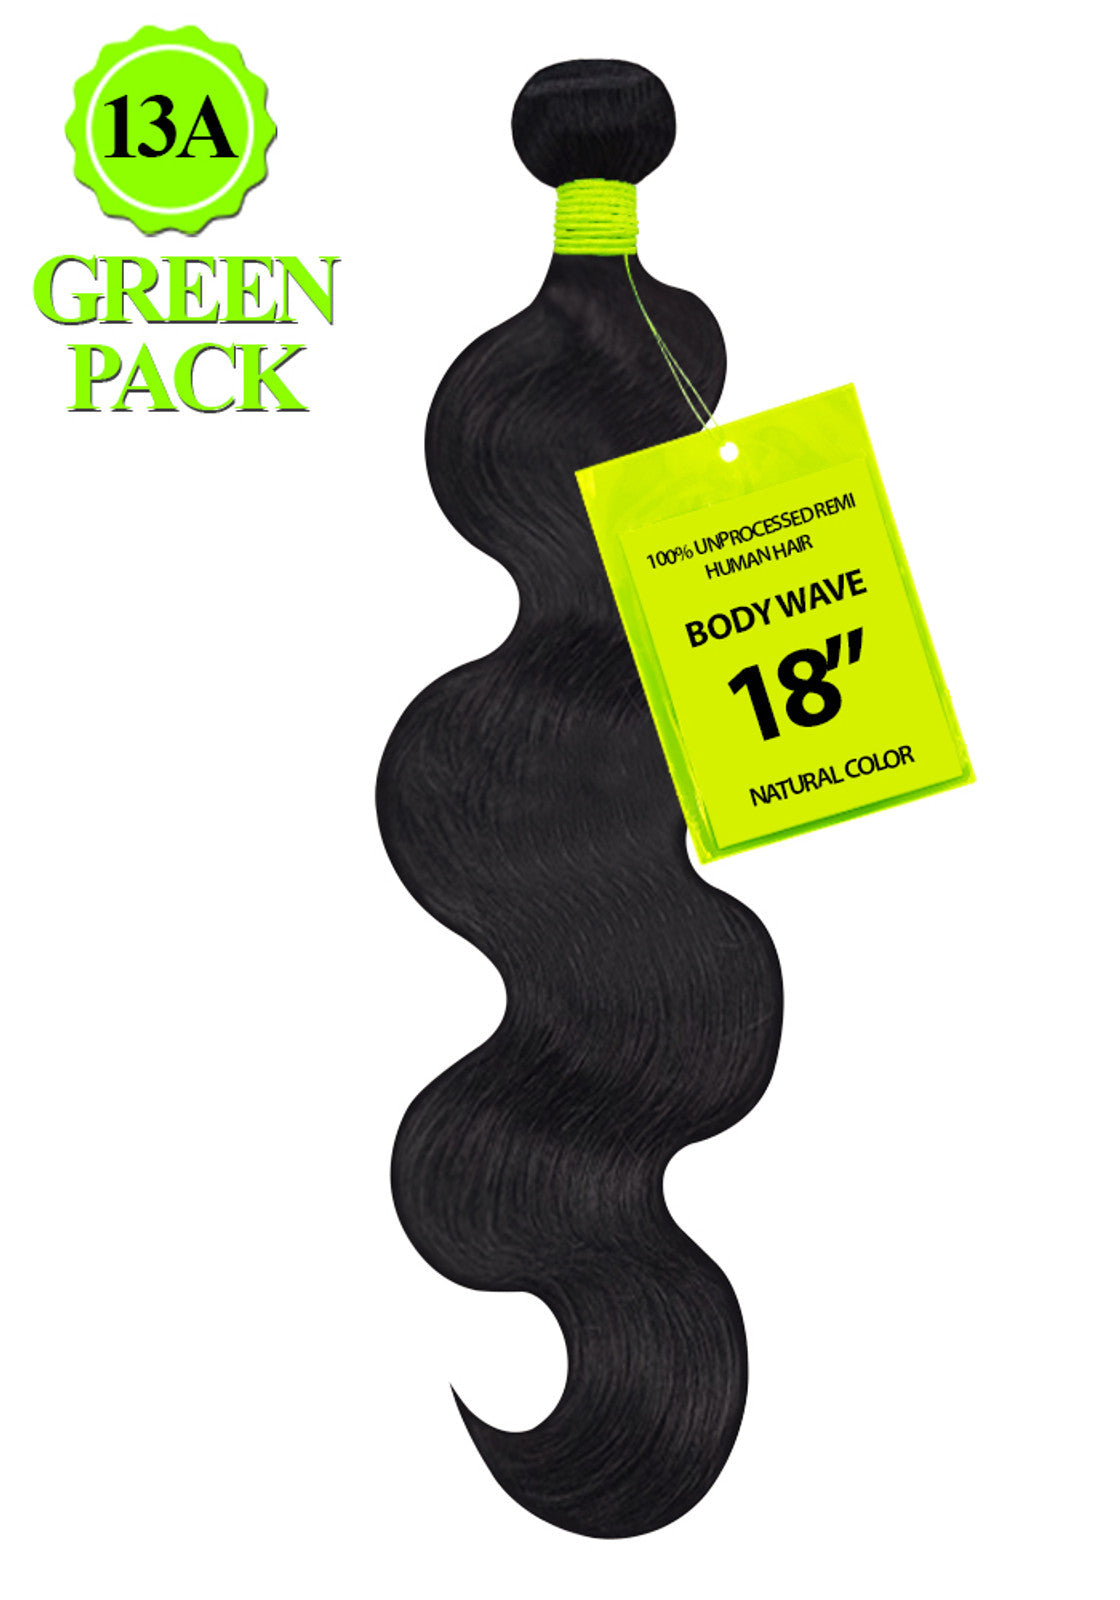 13A GREEN TAG 3 - BUNDLE DEAL - BODY WAVE